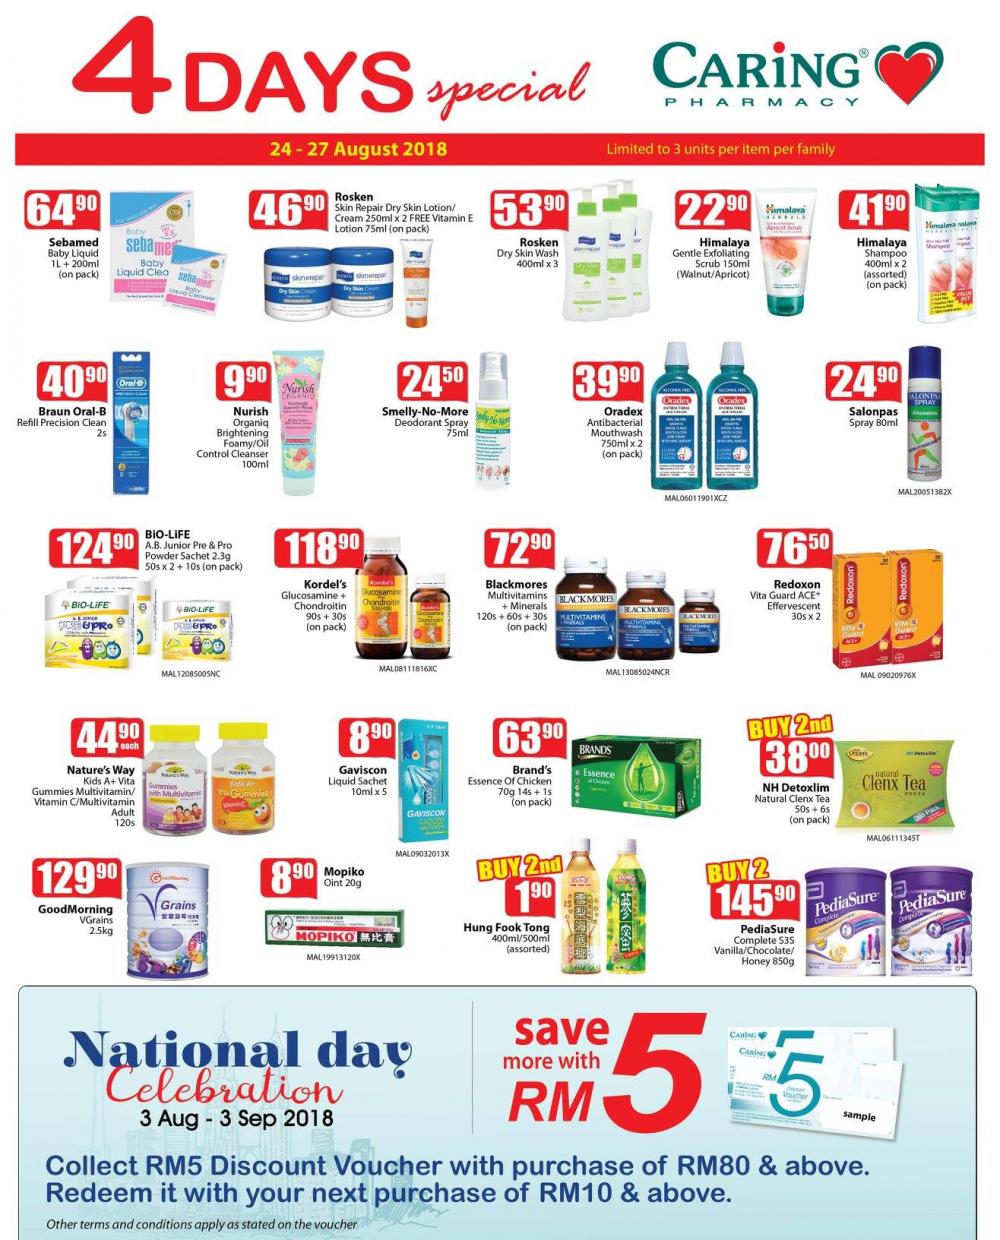 CARiNG PHARMACY 4 Days Special Promotion (24 August 2018 - 27 August 2018)